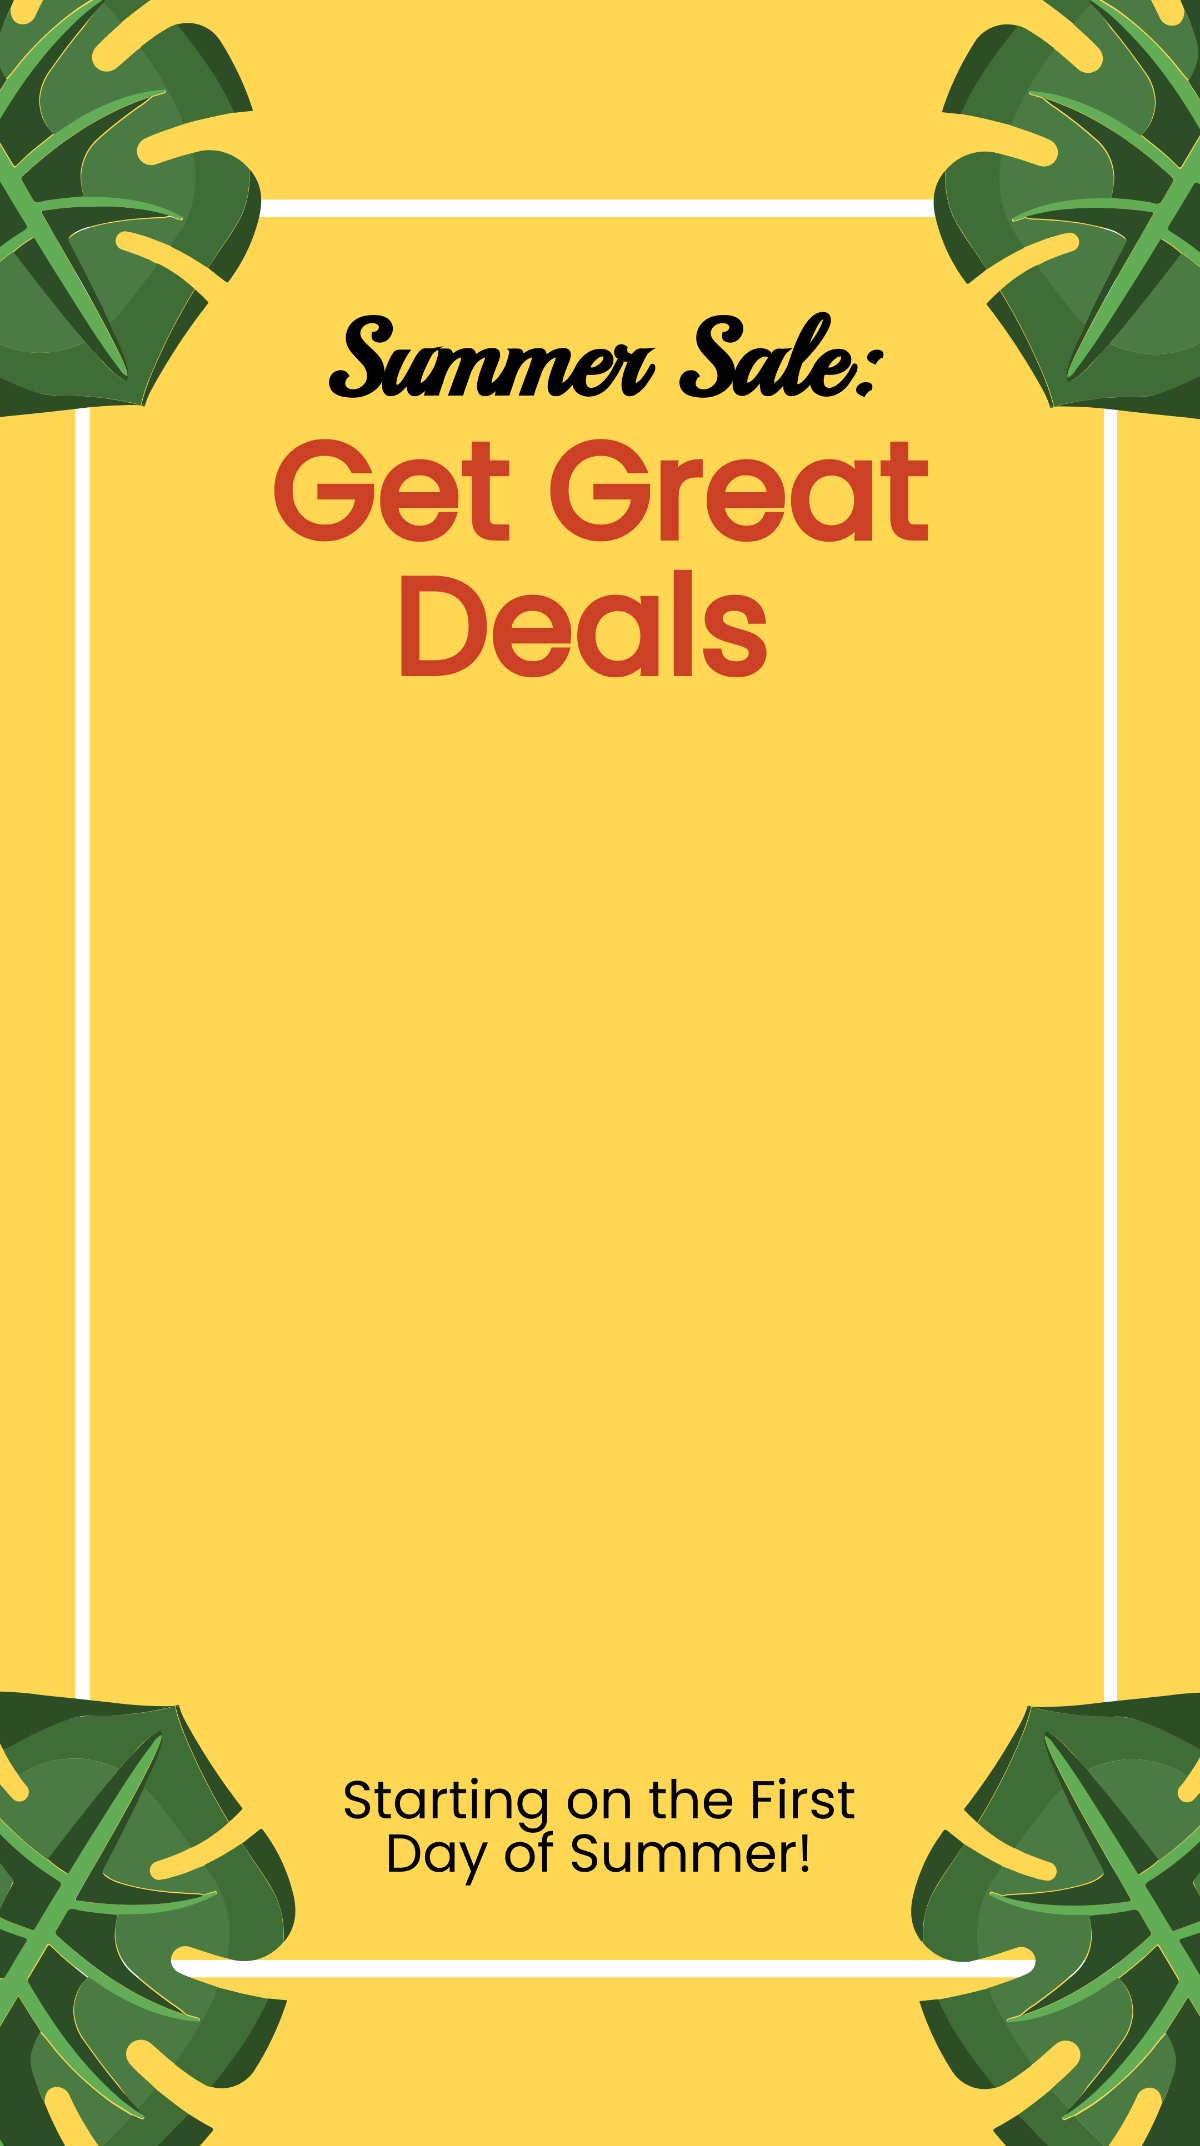 First Day of Summer Sale Snapchat Geofilter template